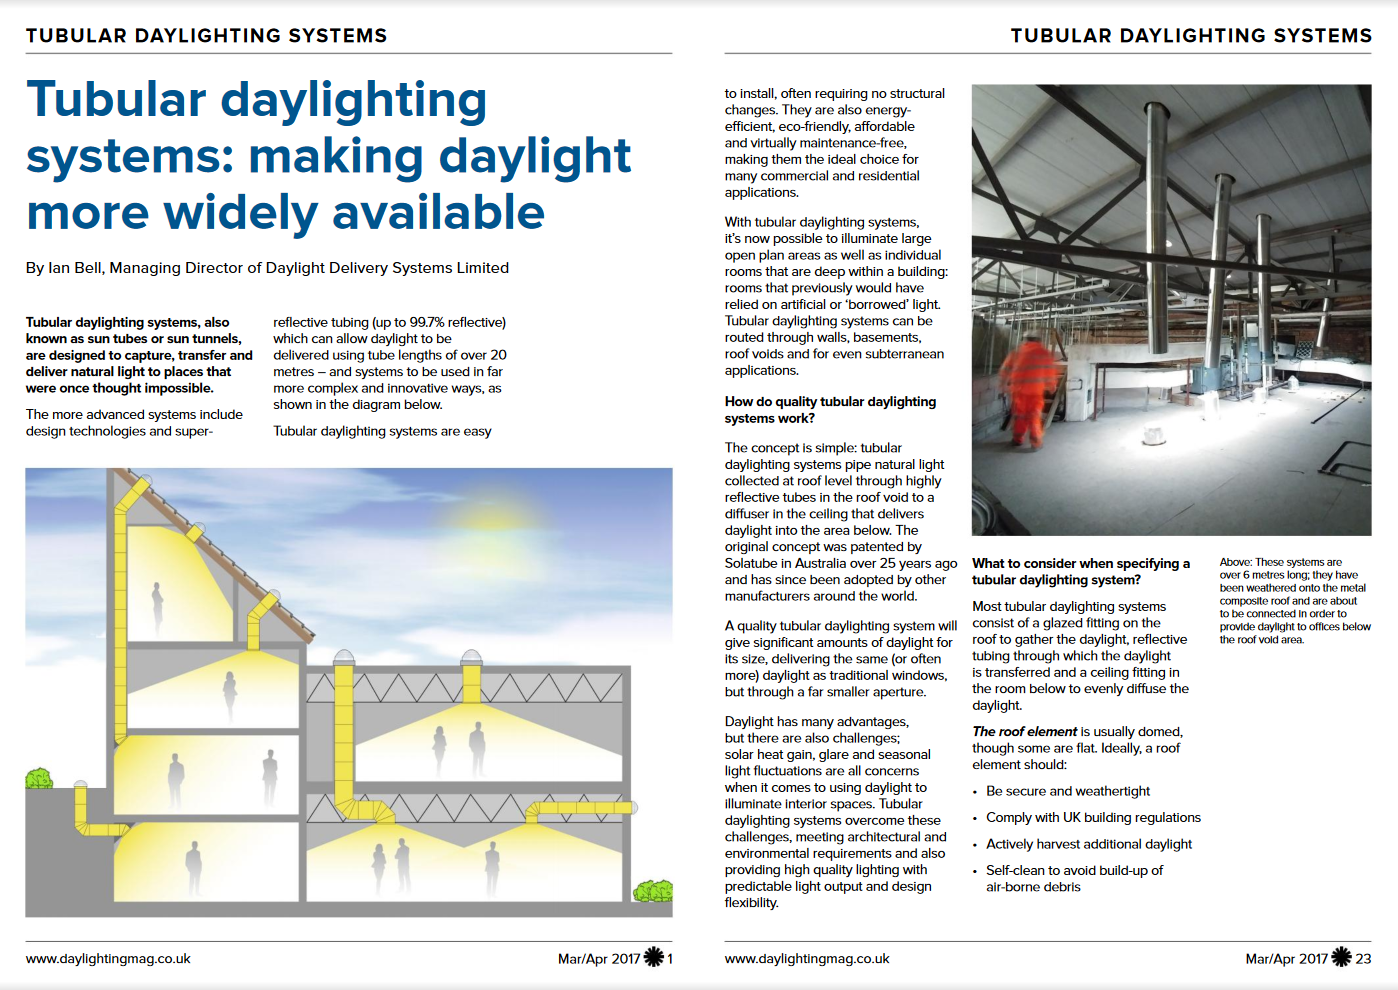 Daylighting magazine feature pages 1-2